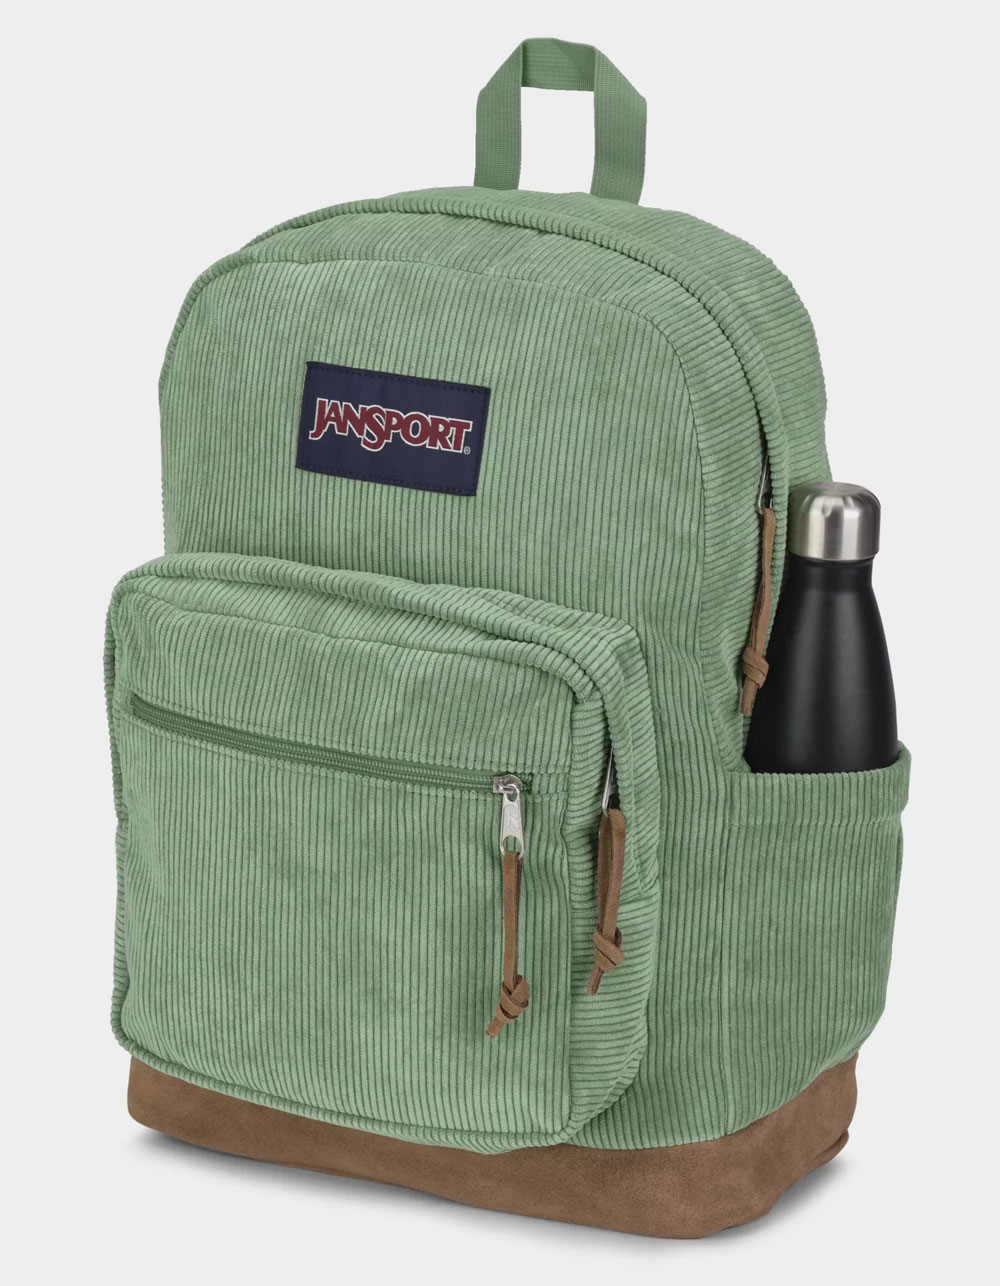 JANSPORT Right Pack Expressions Corduroy Backpack - LODEN FROST ...